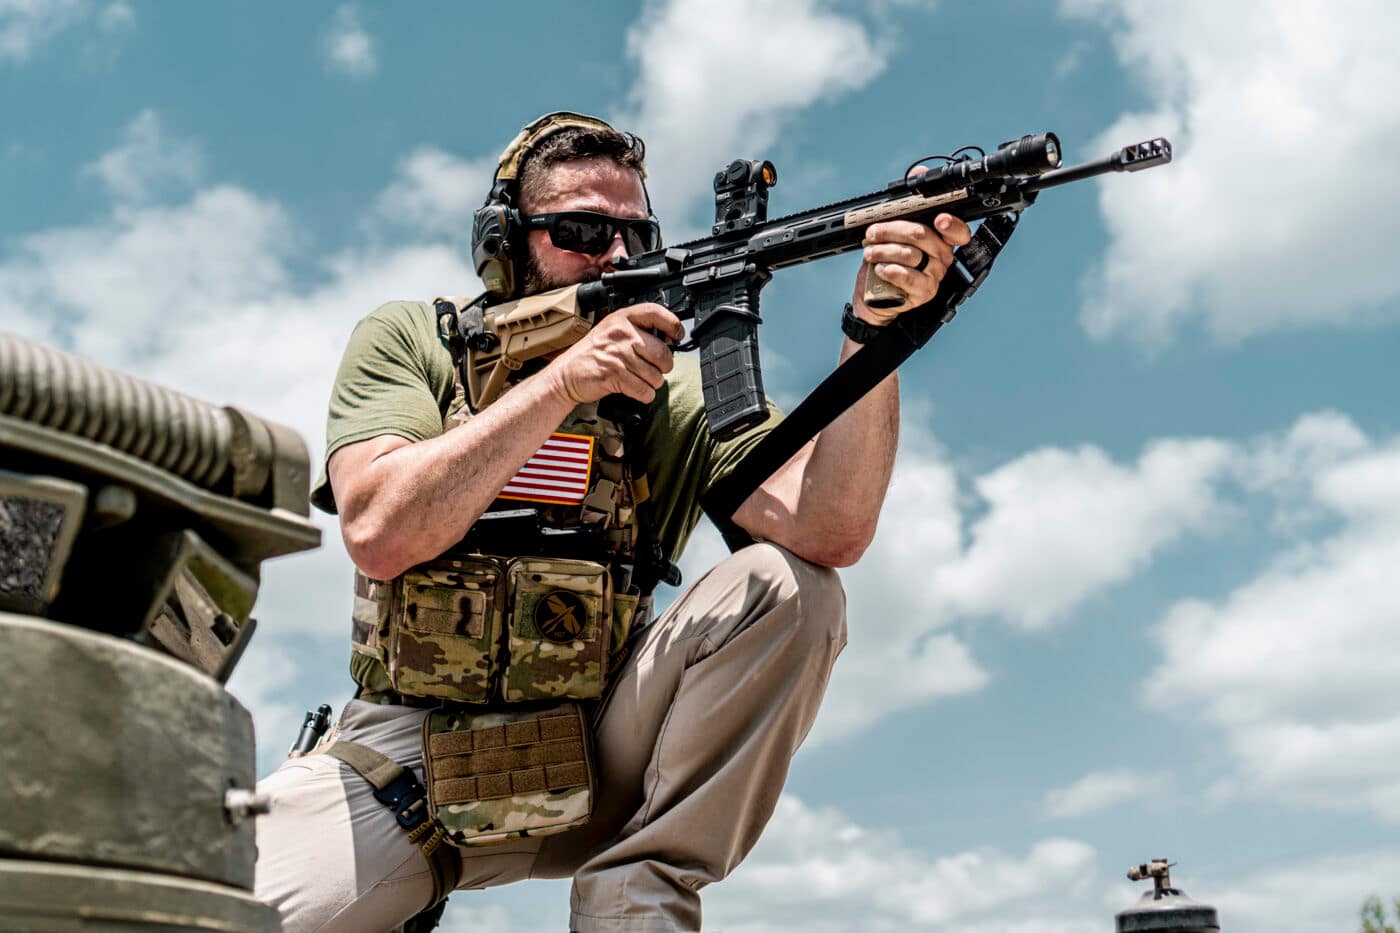 Man shooting rifle while wearing a minimalist plate carrier setup